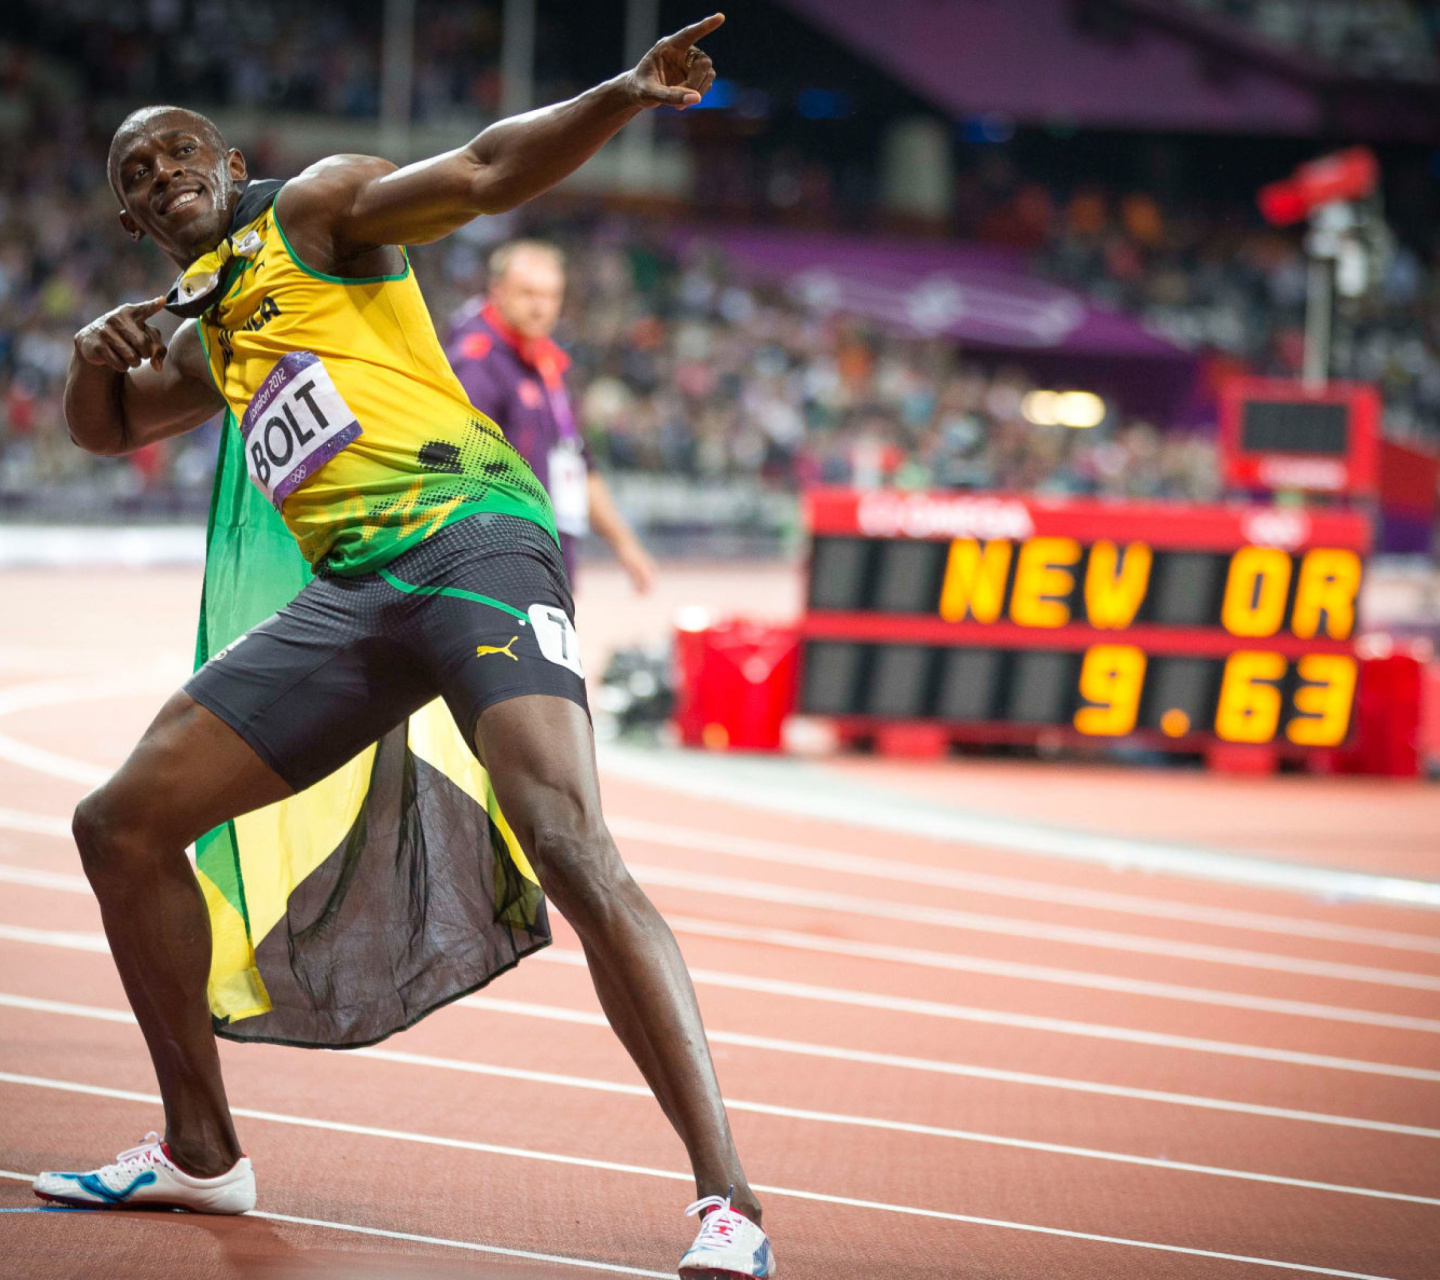 Usain Bolt won medals in the Olympics screenshot #1 1440x1280